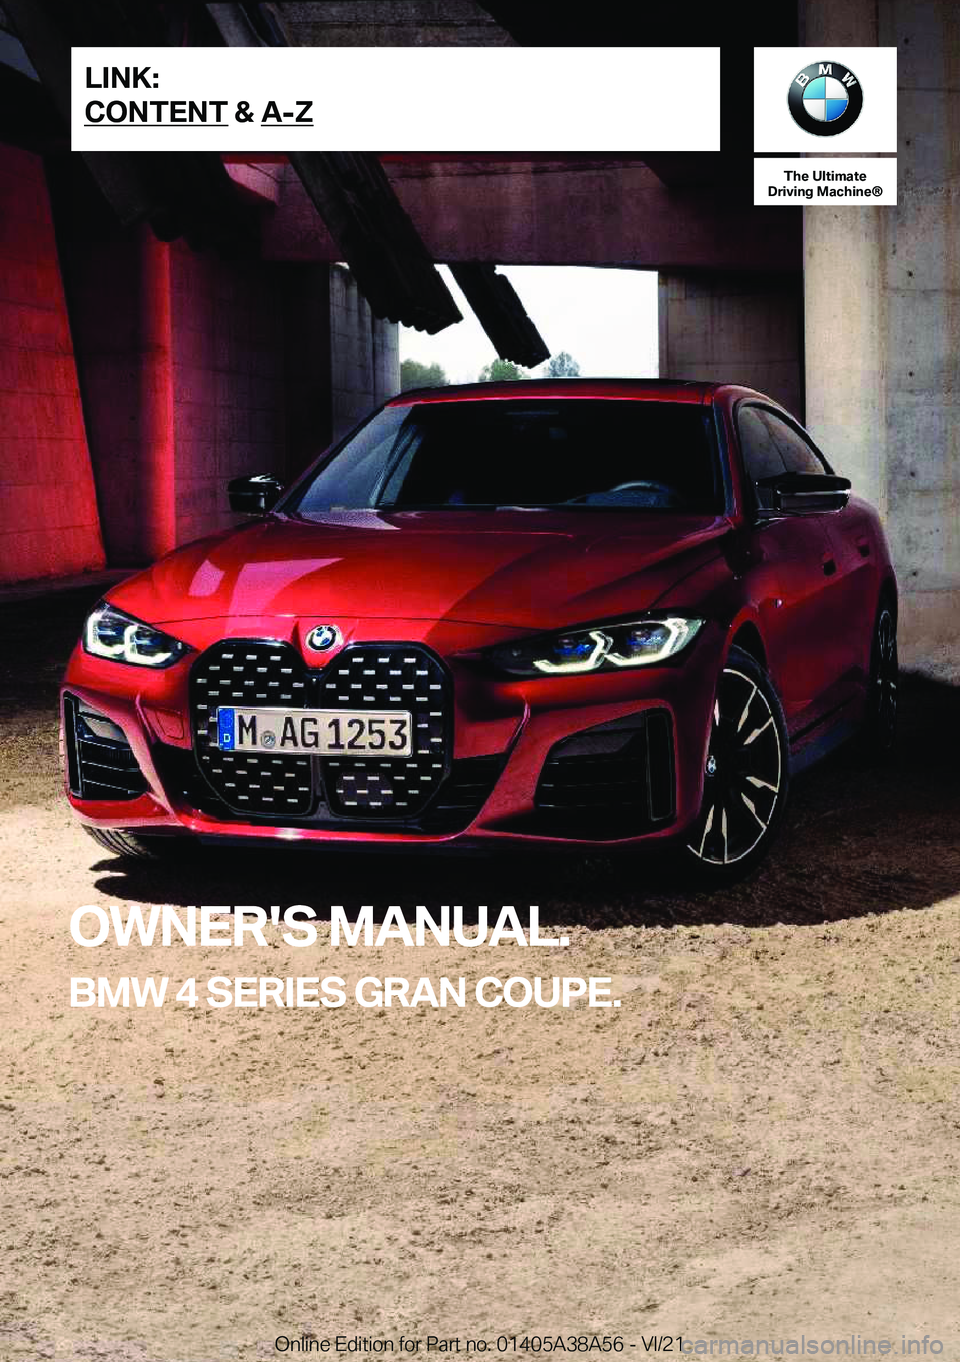 BMW 4 SERIES COUPE 2022  Owners Manual �T�h�e��U�l�t�i�m�a�t�e
�D�r�i�v�i�n�g��M�a�c�h�i�n�e�n
�O�W�N�E�R�'�S��M�A�N�U�A�L�.
�B�M�W��4��S�E�R�I�E�S��G�R�A�N��C�O�U�P�E�.�L�I�N�K�:
�C�O�N�T�E�N�T��&��A�-�Z�O�n�l�i�n�e��E�d�i�t